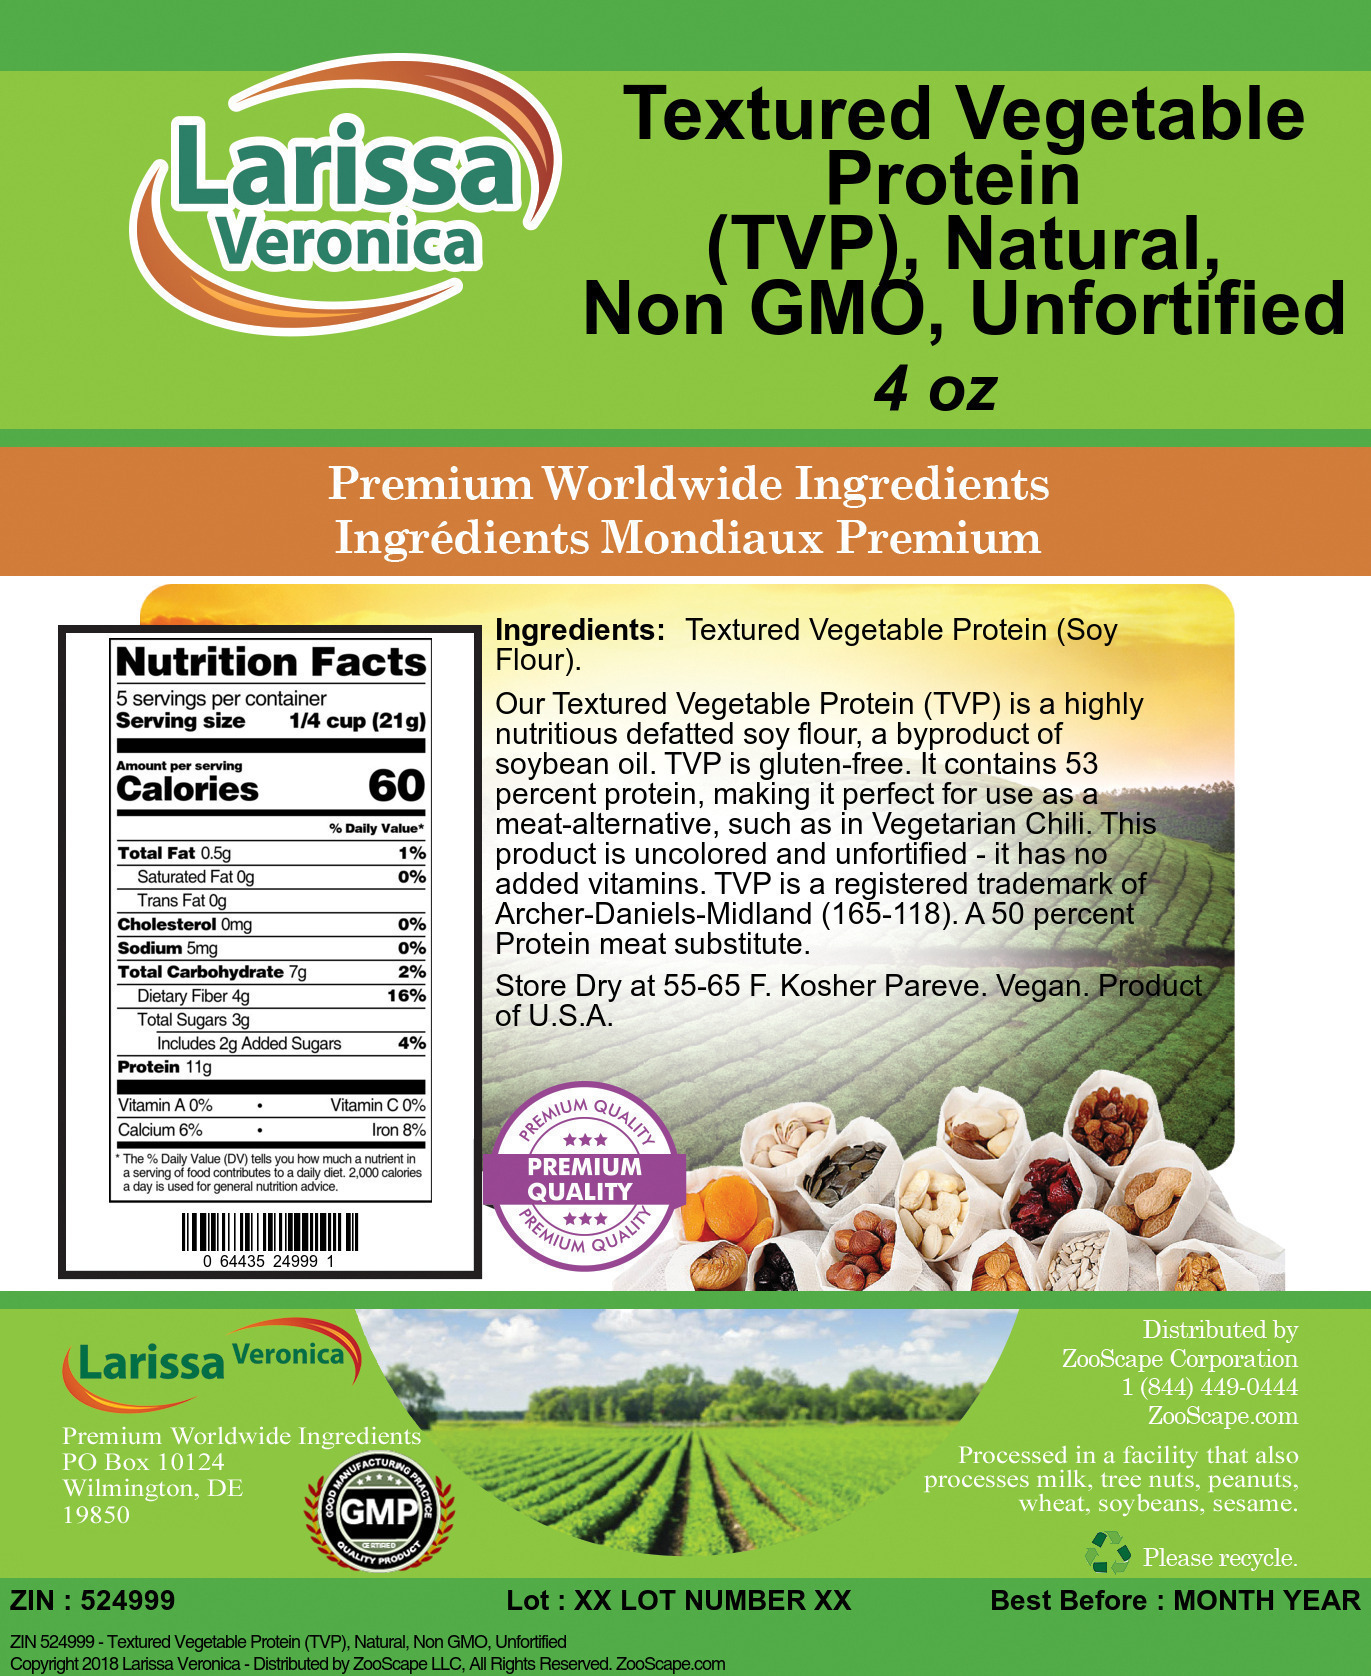 Textured Vegetable Protein (TVP), Natural, Non GMO, Unfortified - Label